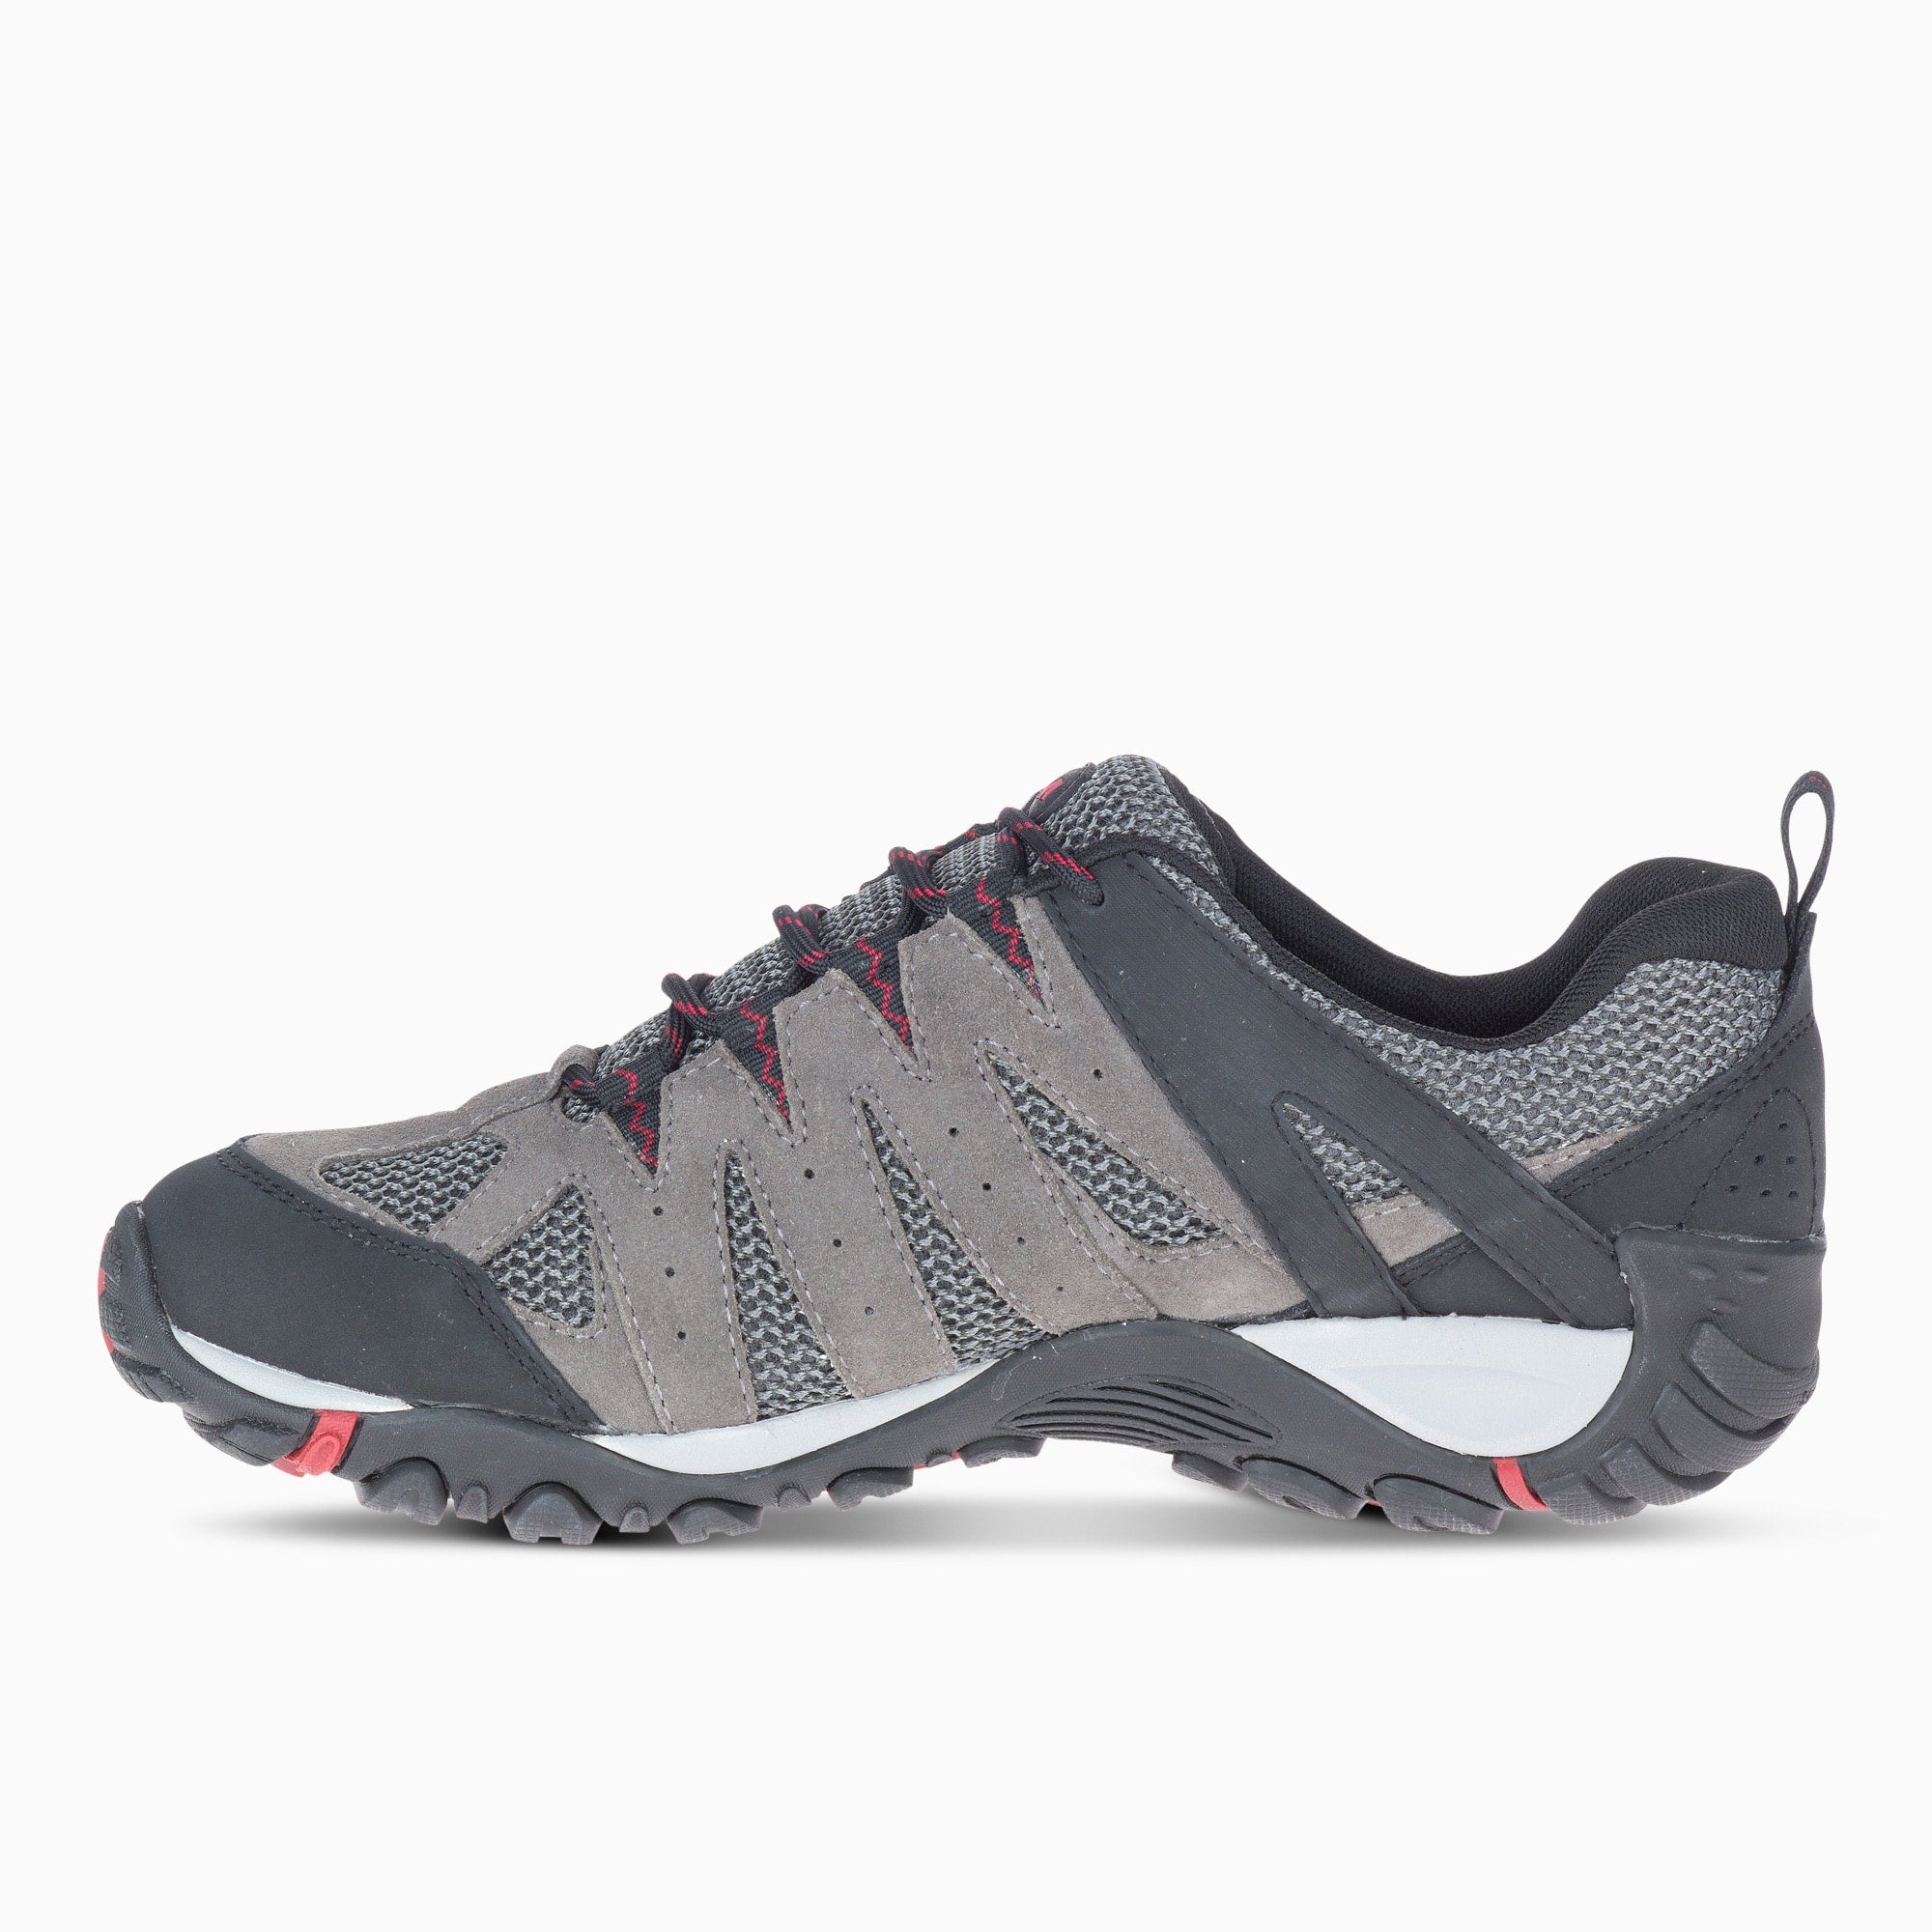 Men's Accentor 2 Vent WP - Charcoal